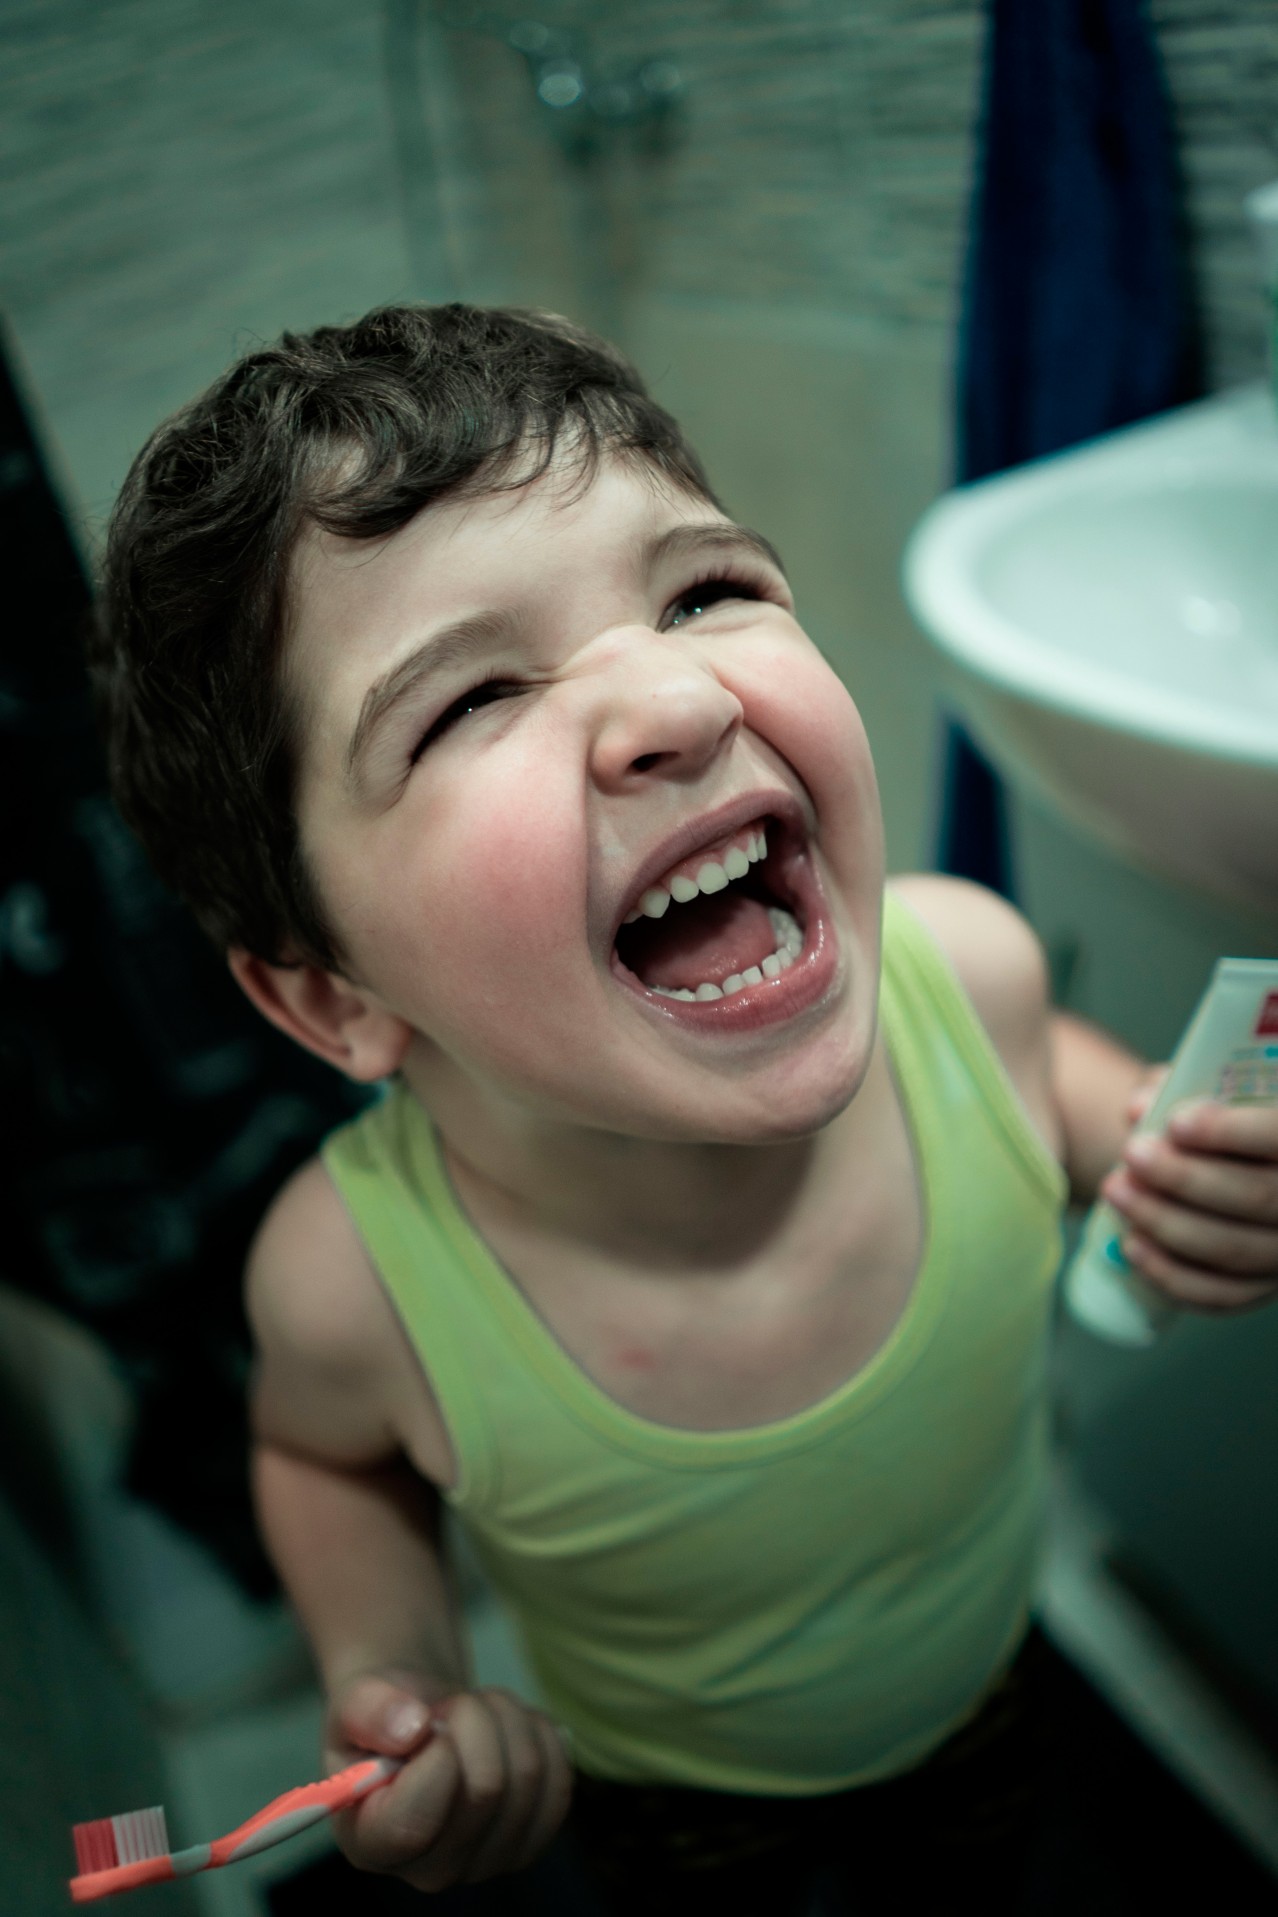 Excited kid holding toothbrush and toothpaste